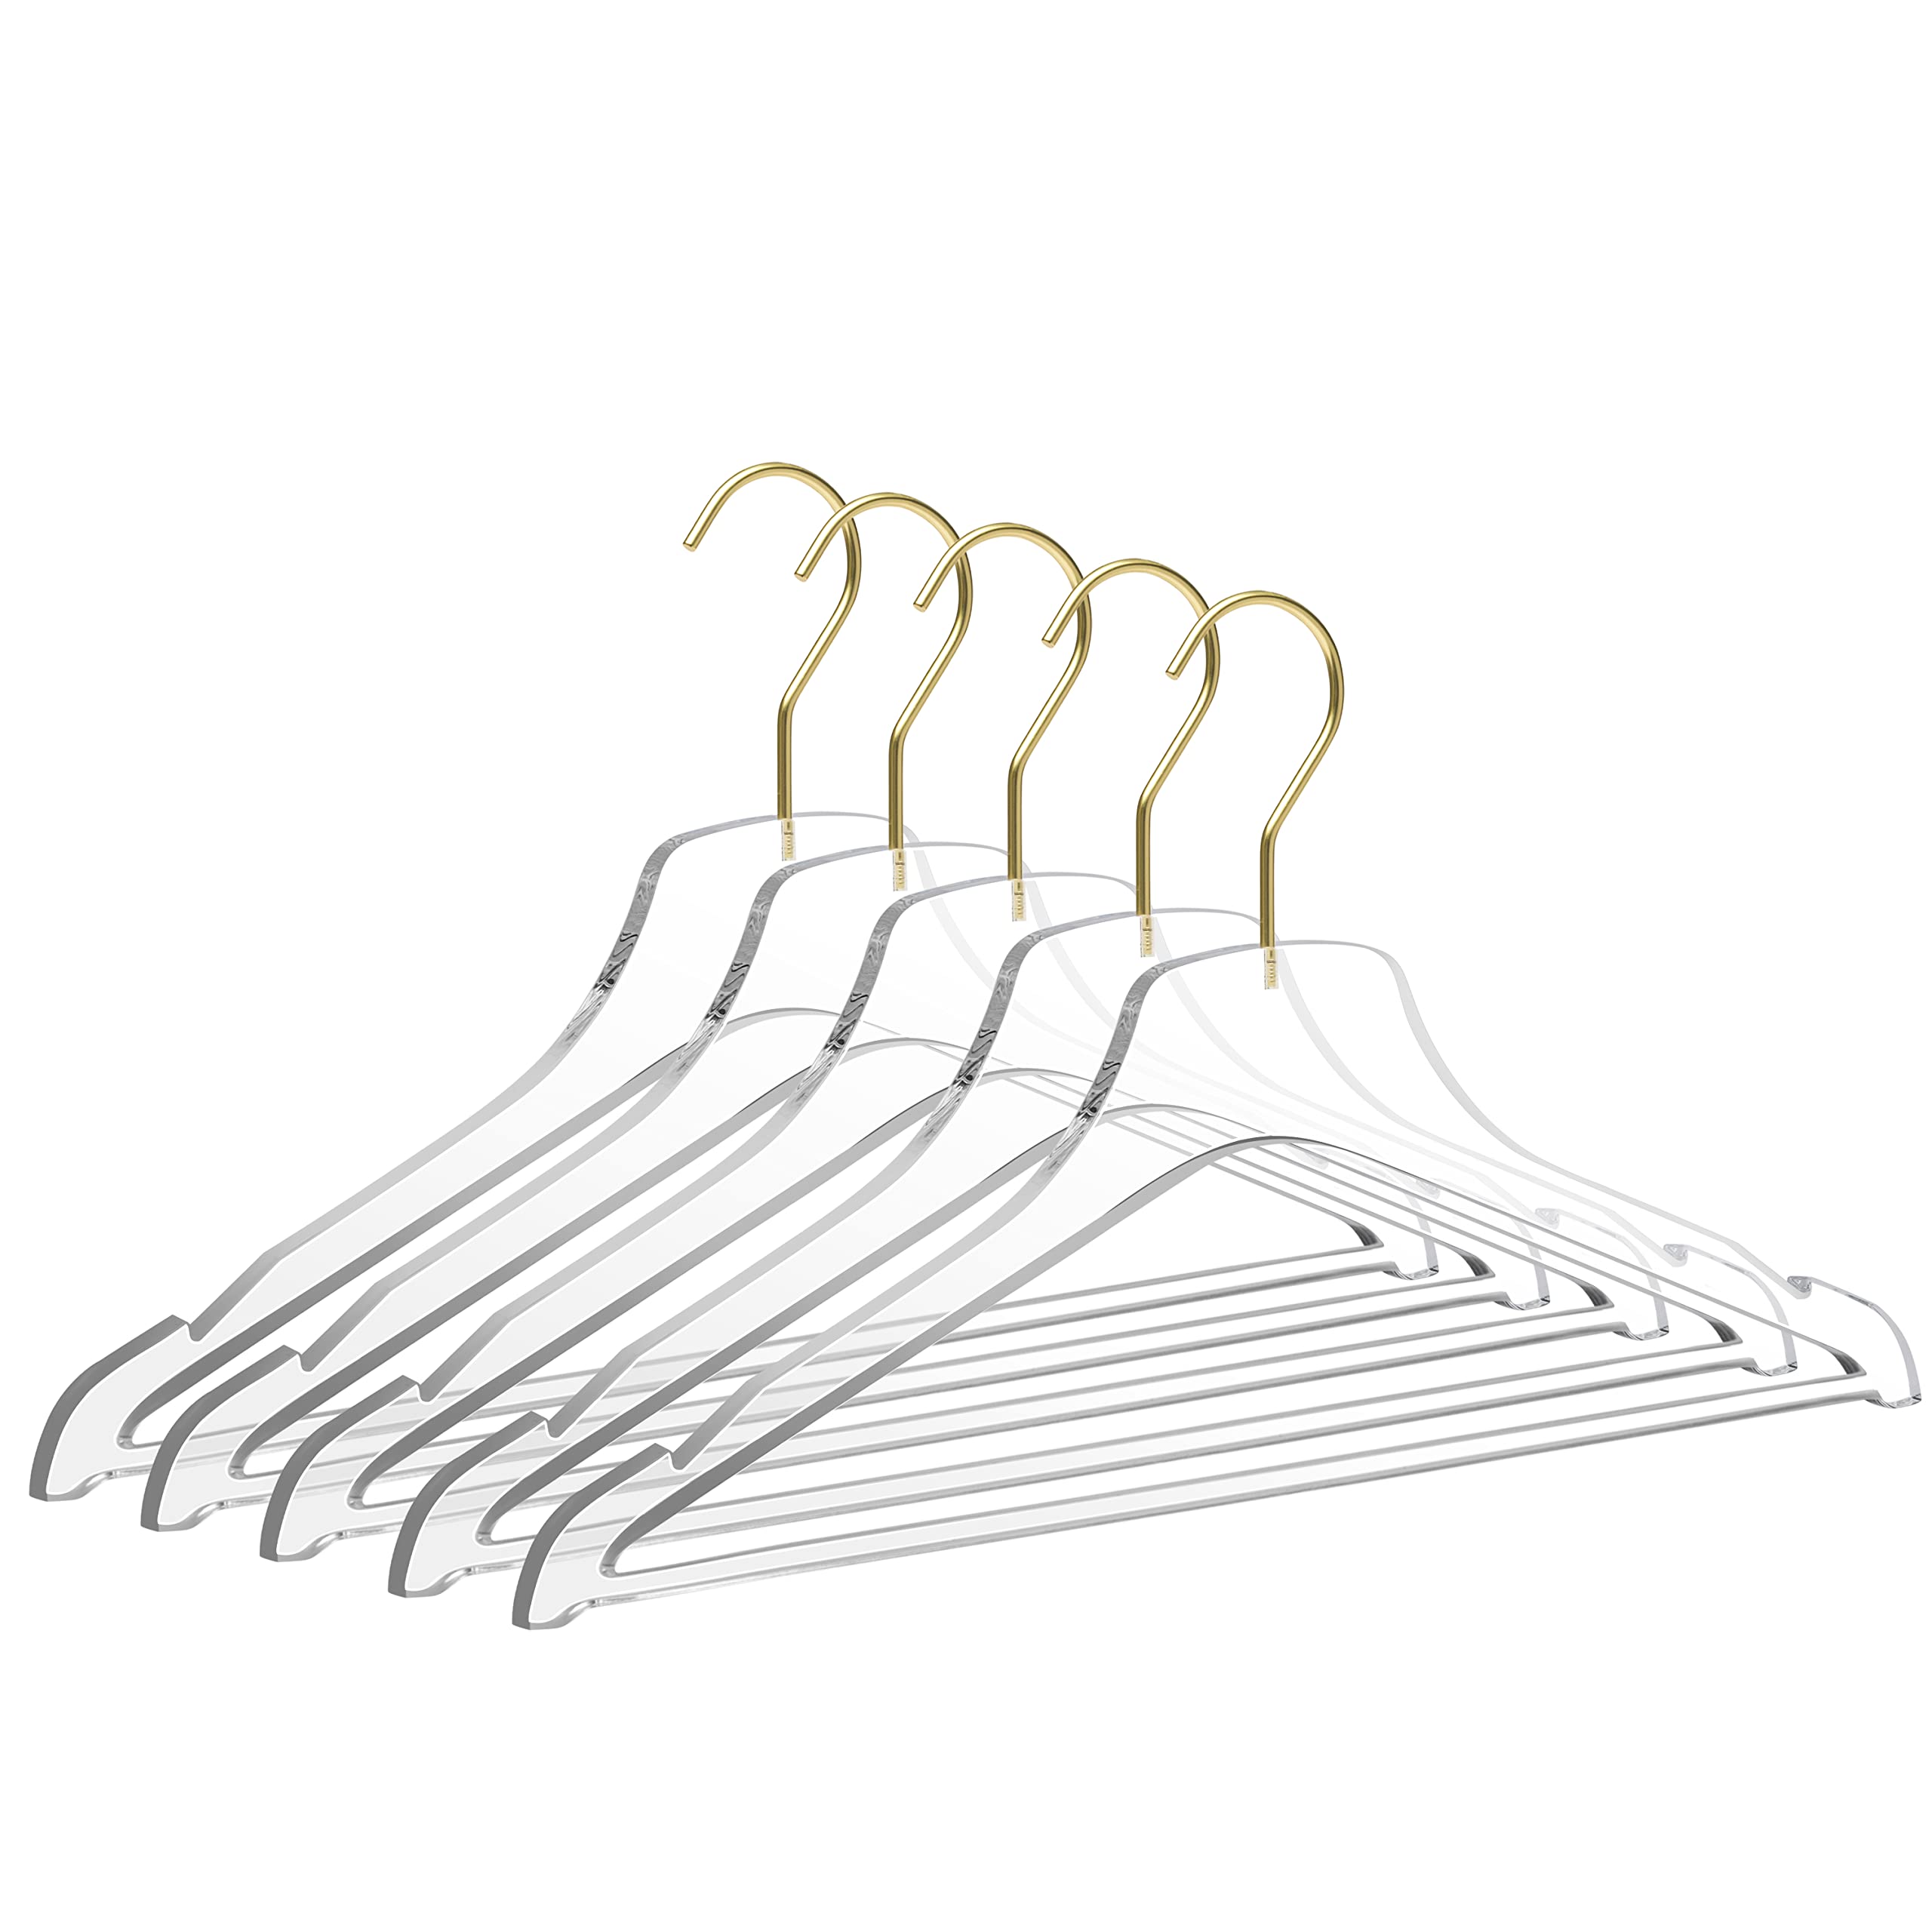 Quality Acrylic Clear Lucite Hangers 20-Pack with Bar Matte Gold Hanging Hooks for Clothes, Pants, Suit Jackets, Coats, and Shirts, Closet and Wardrobe Organization (Matte Gold Hook, 20)  - Like New